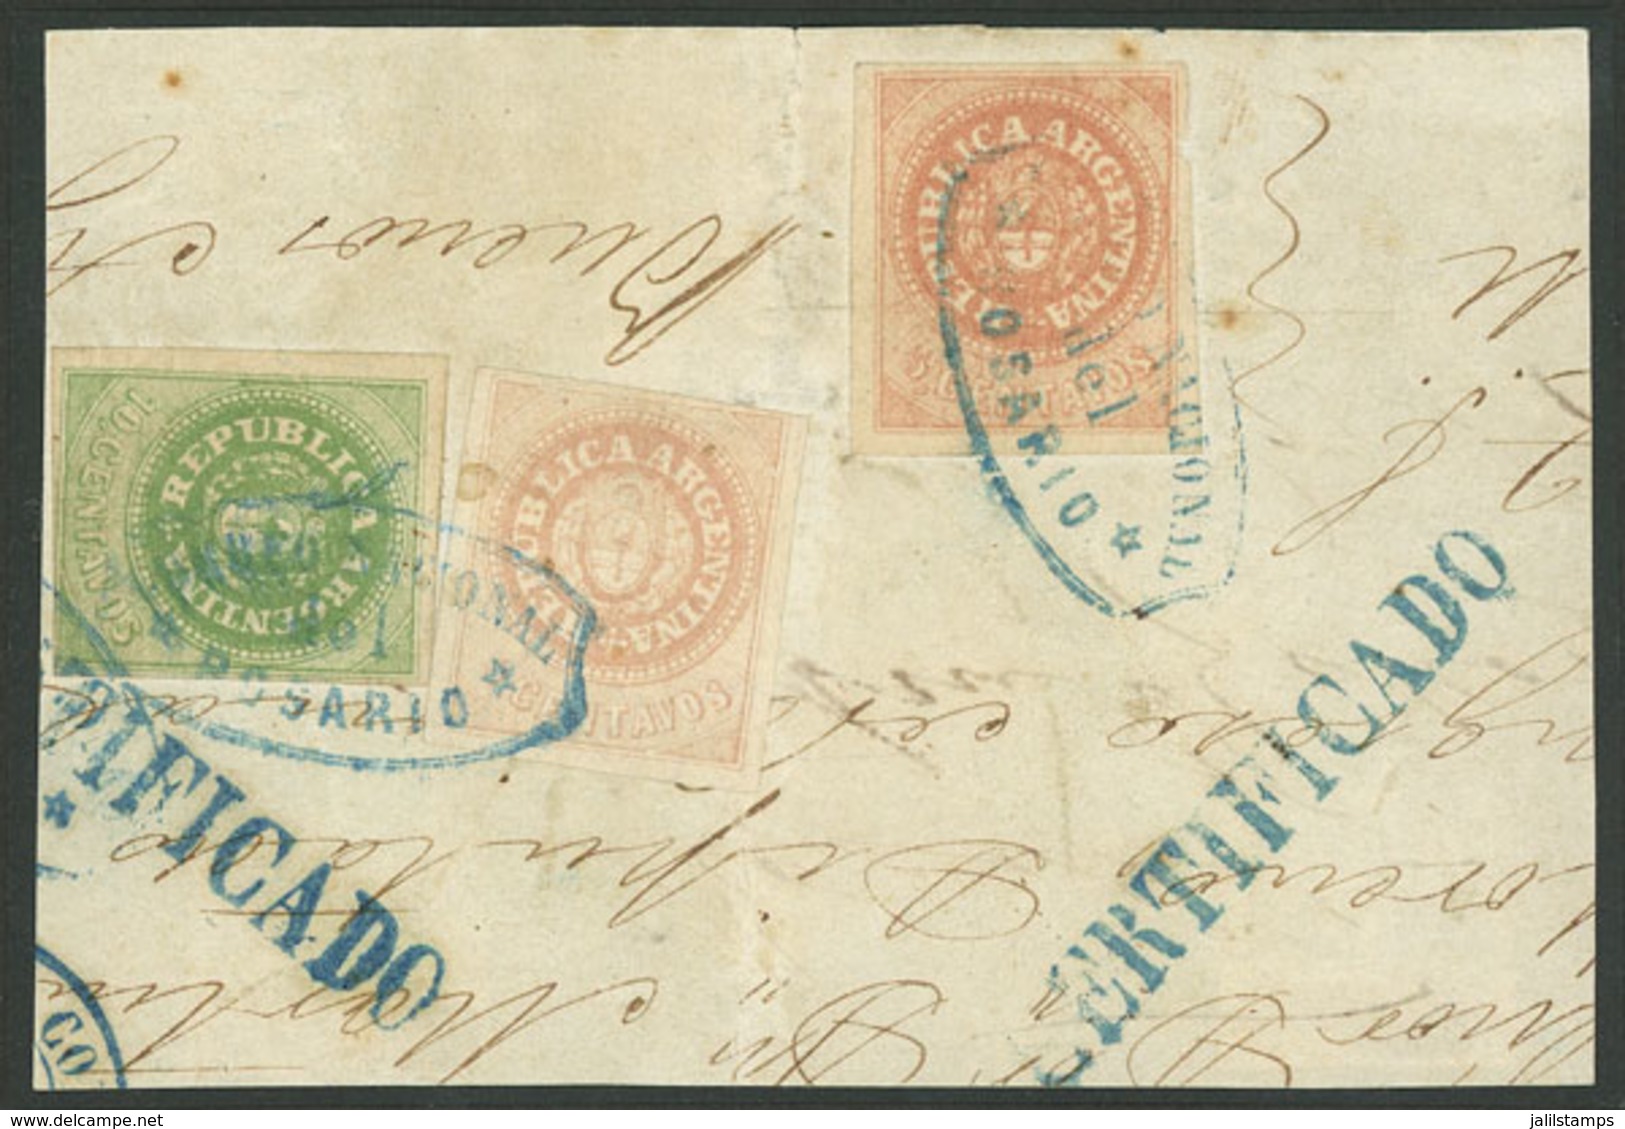 ARGENTINA: GJ.8 + 7A, Fragment Of A Registered Cover Sent From Rosario To Buenos Aires, Franked By GJ.8 (10c. With Accen - Covers & Documents